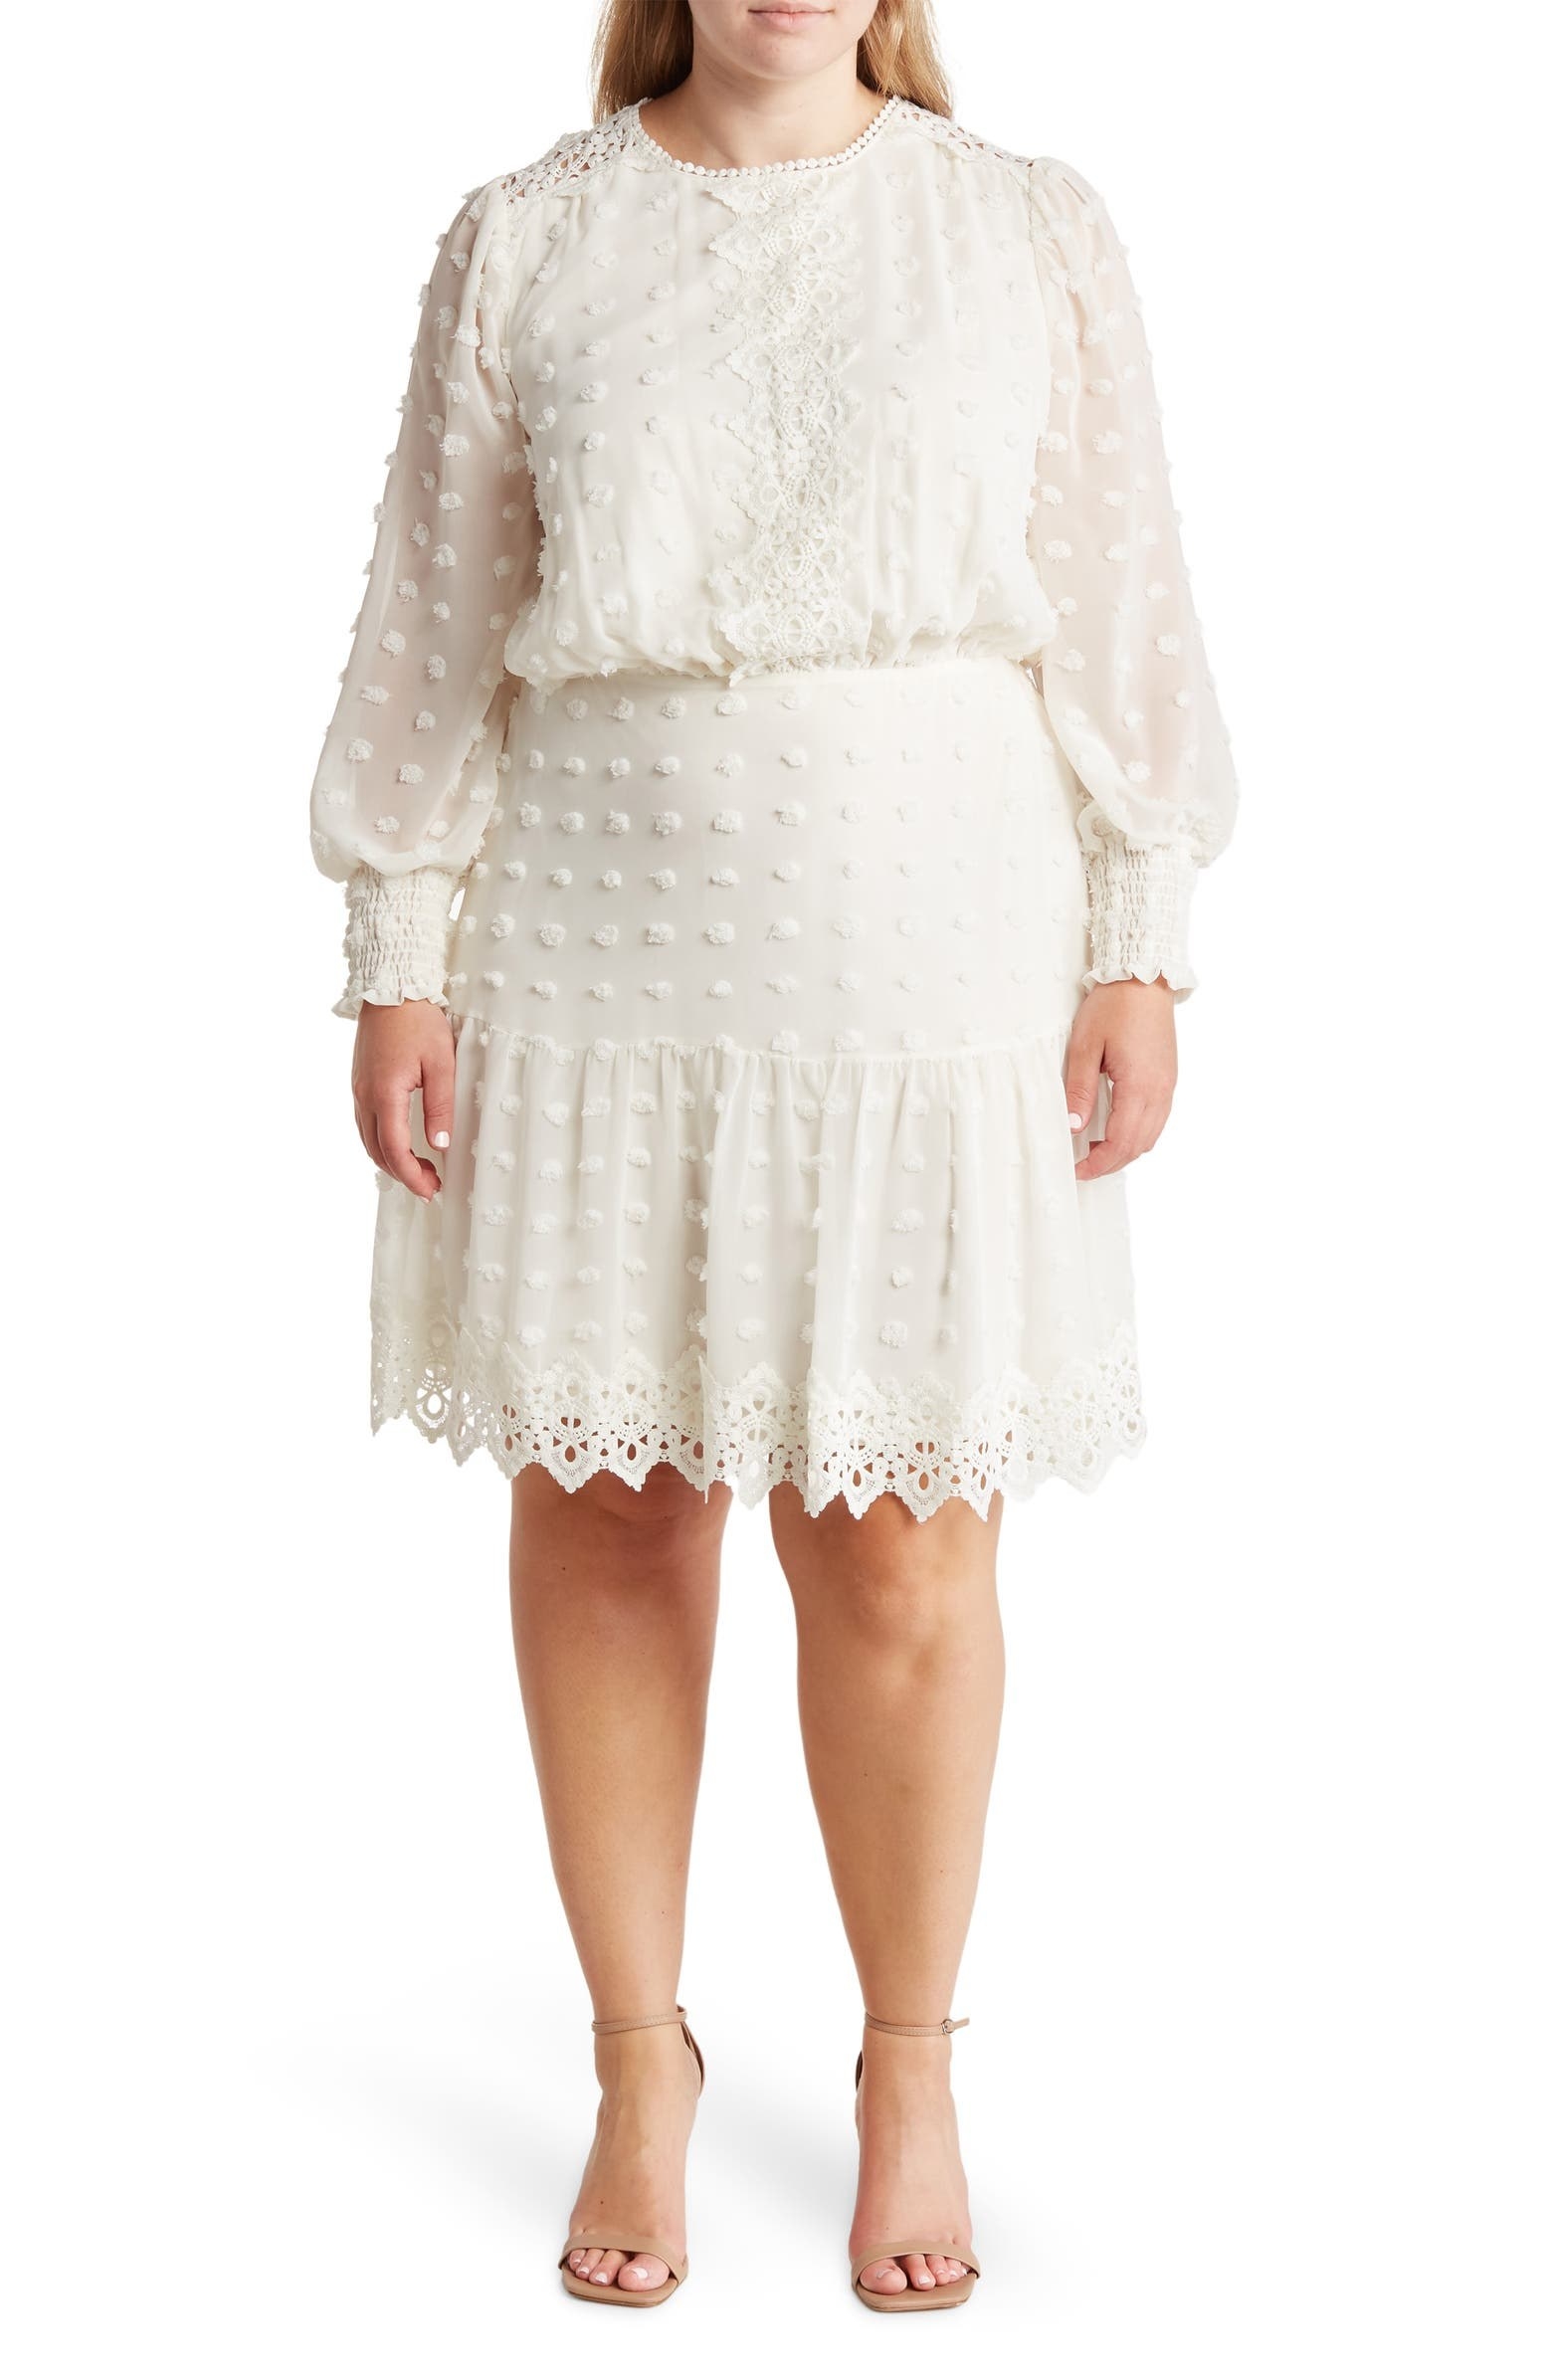 model in white knee-length dress and long sheer sleeves with embroidered textured dots covering it